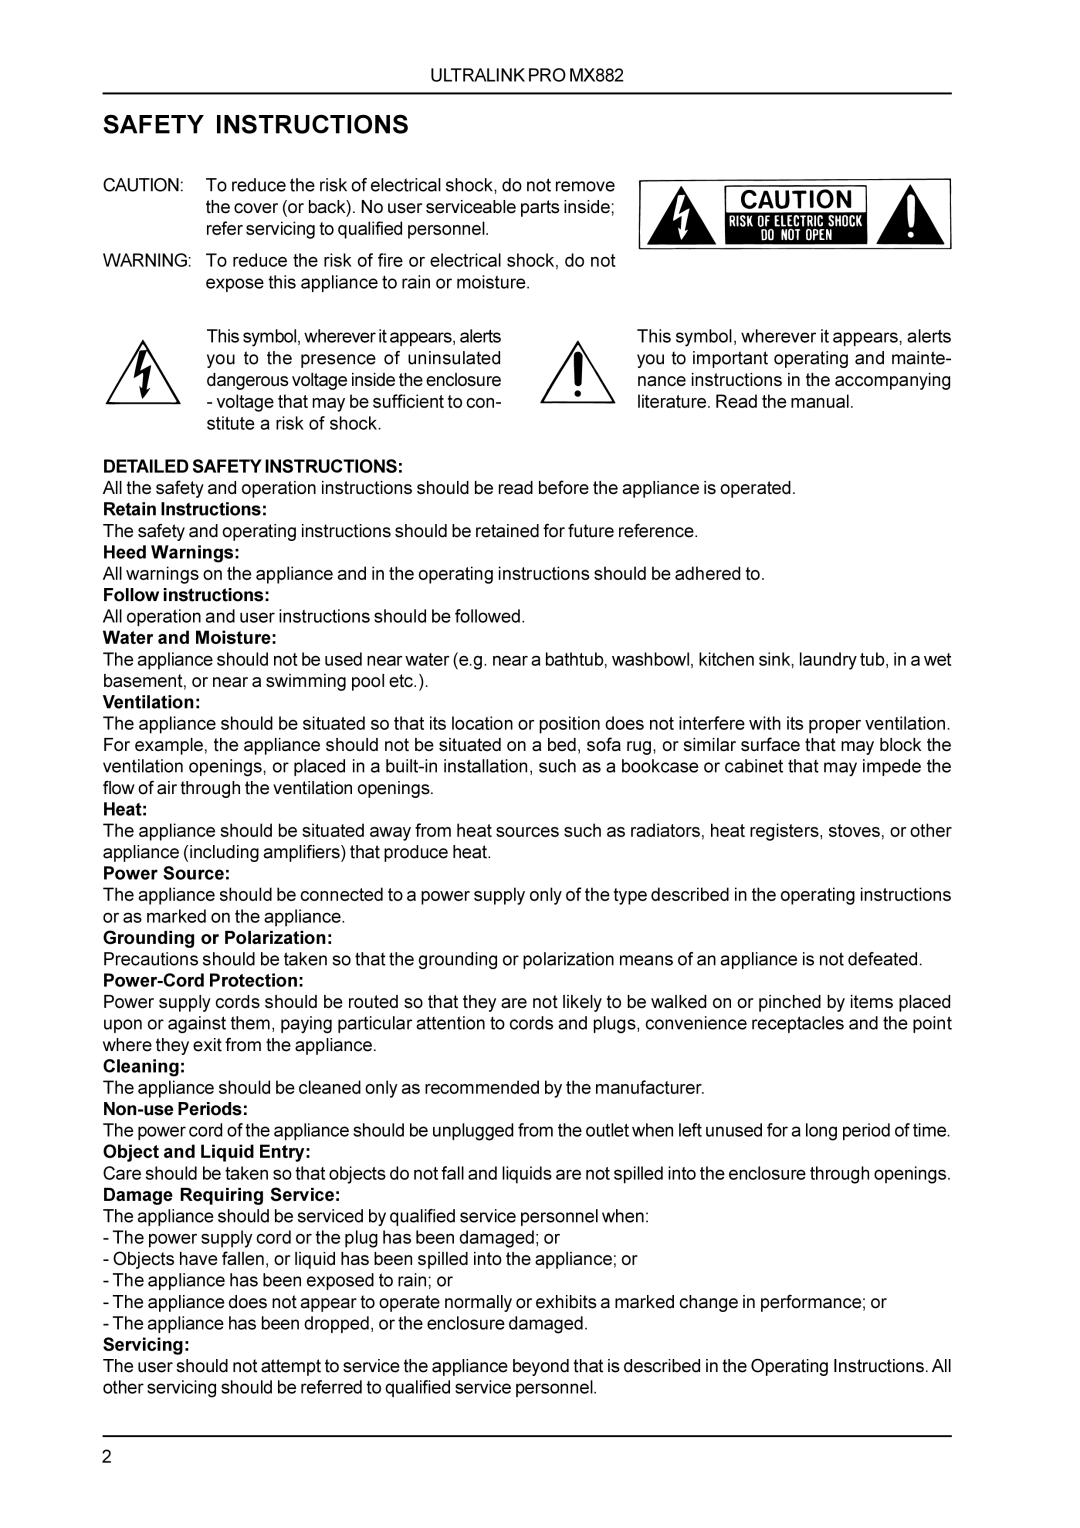 Behringer MX882 manual Safety Instructions 